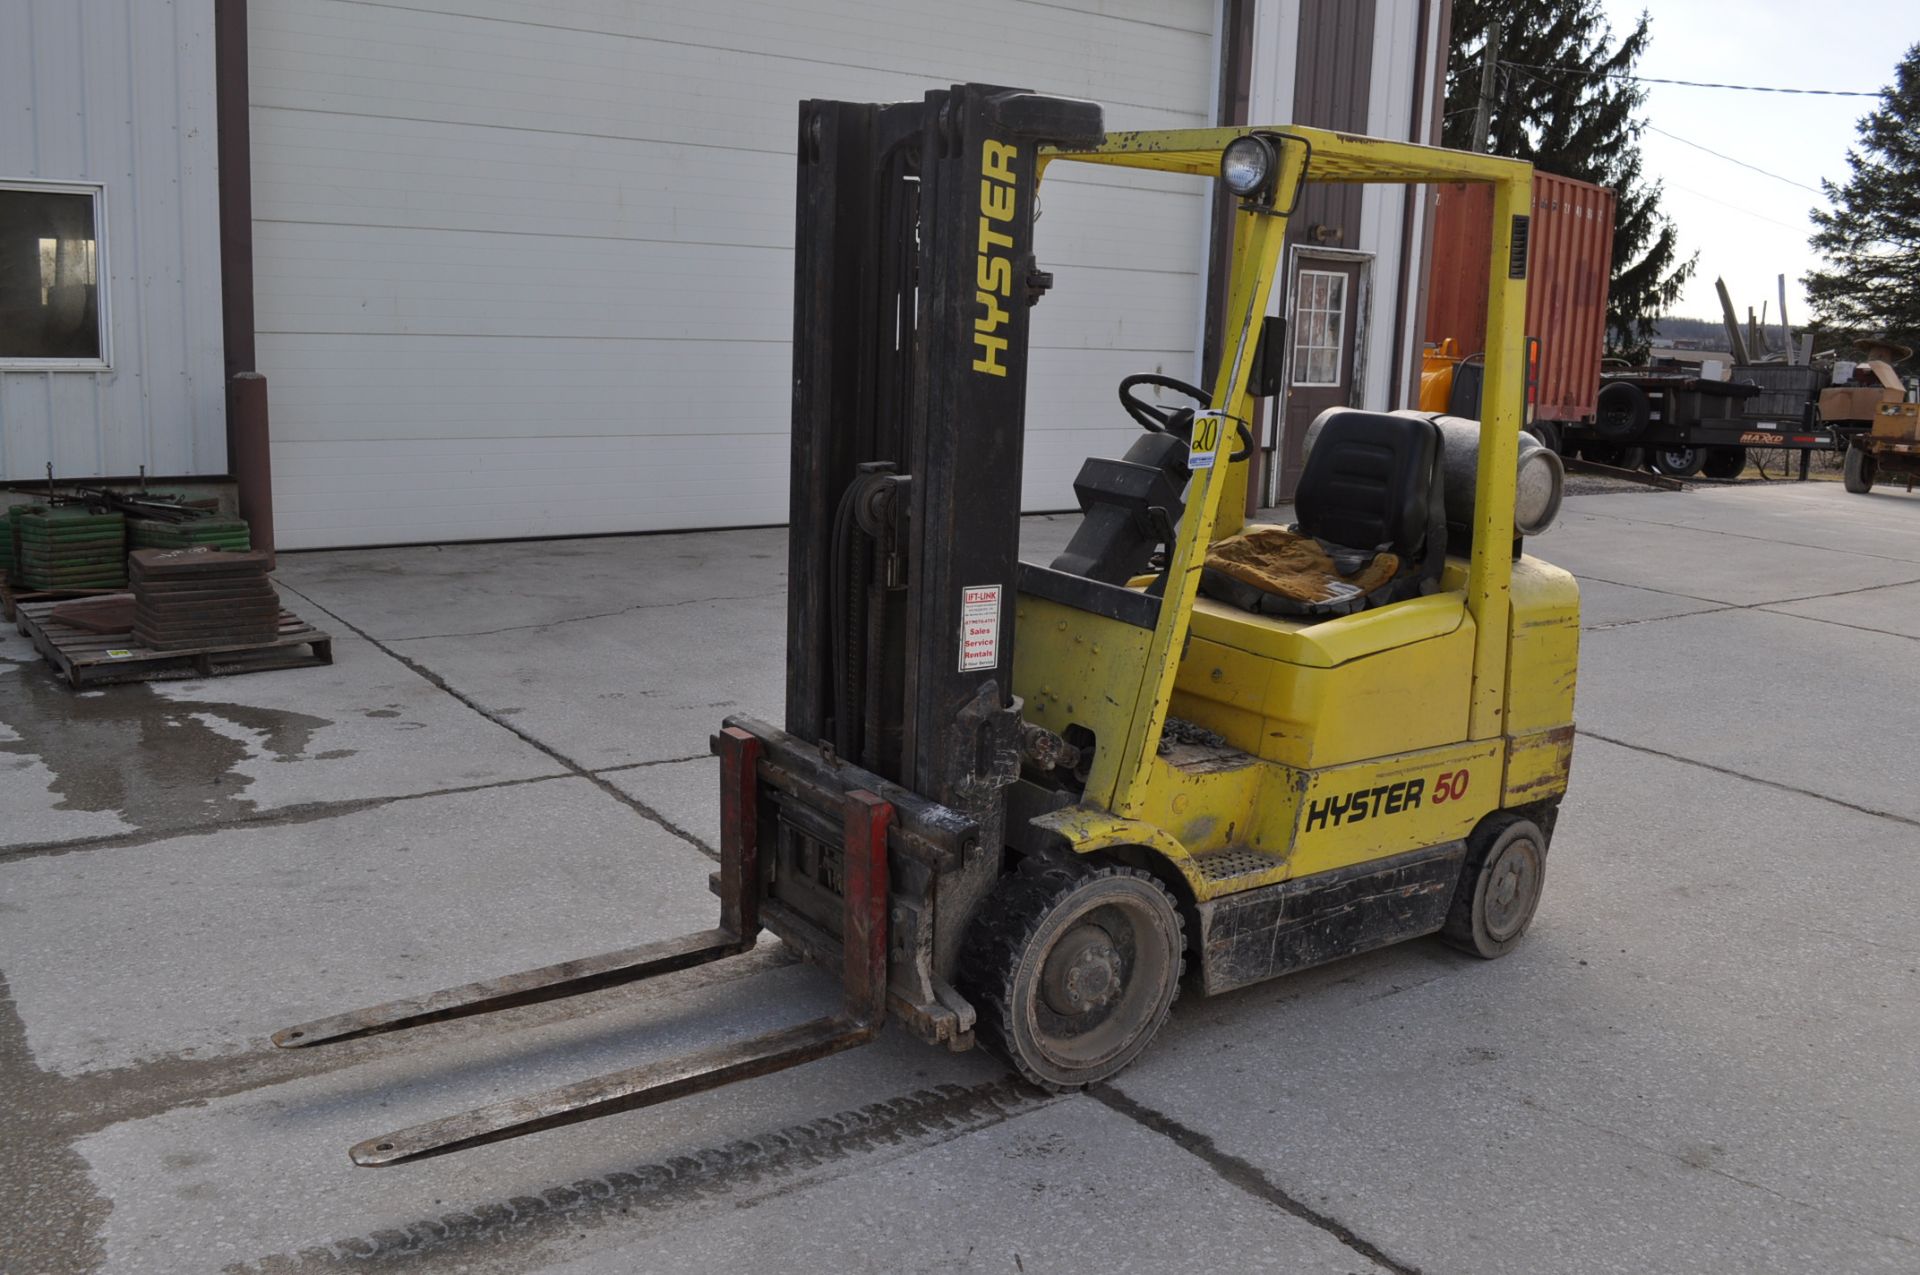 Hyster 50 fork lift, 3 stage mast, sideshift, LP, solid tires, 5,000 lb capacity